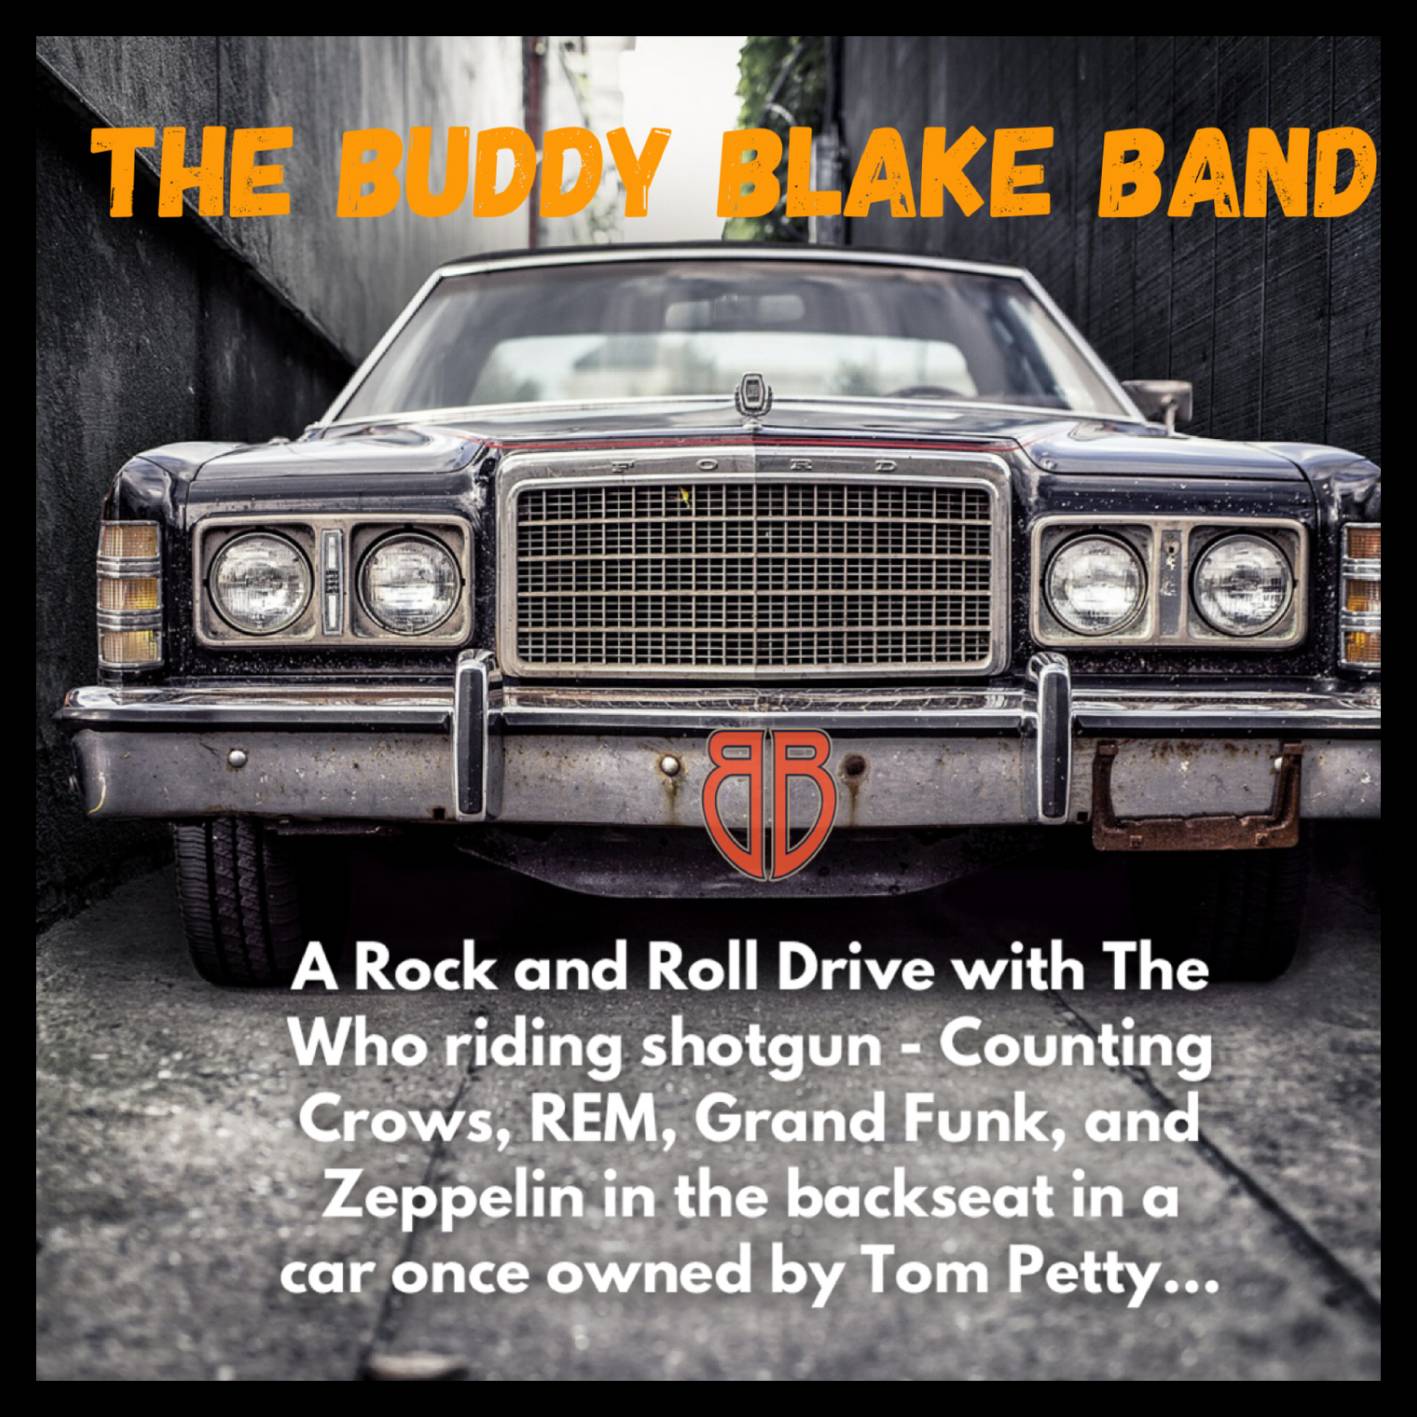 THE BUDDY BLAKE BAND – “Lawrence of Albuquerque” – Redefining Rock with Passion and Prowess